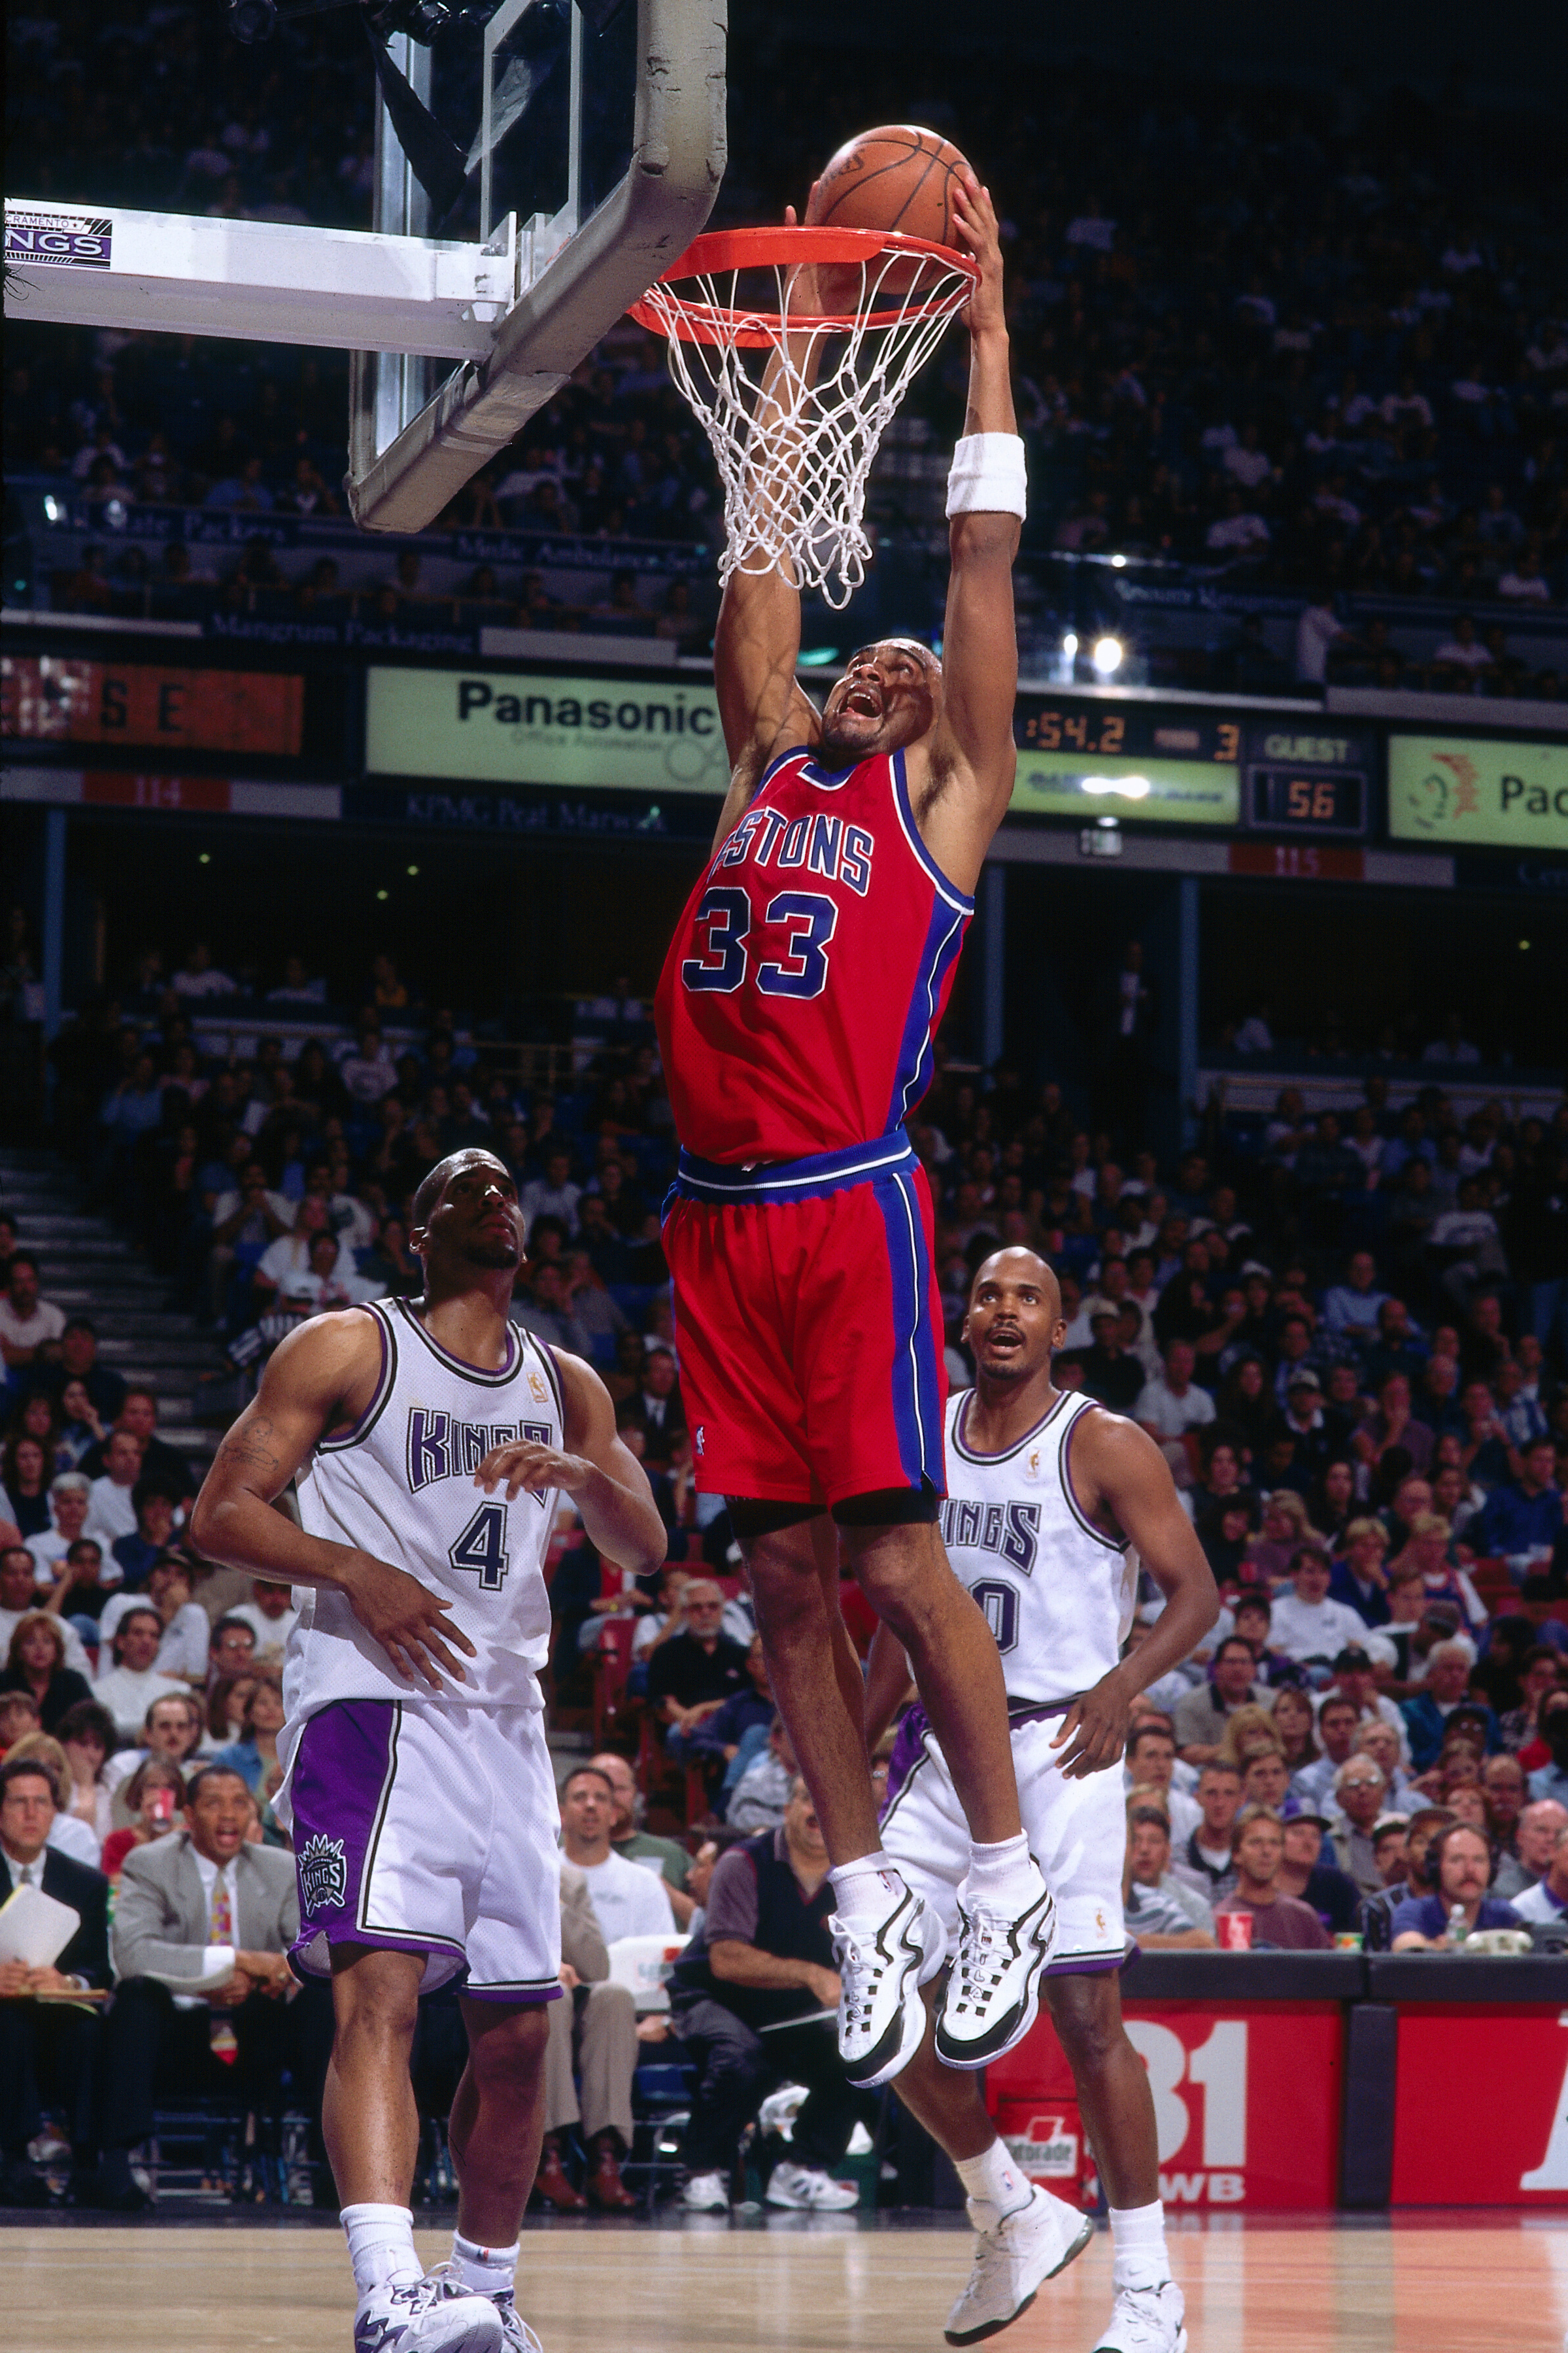 This is a photo of Grant Hill in his 1995 season with the Pistons.